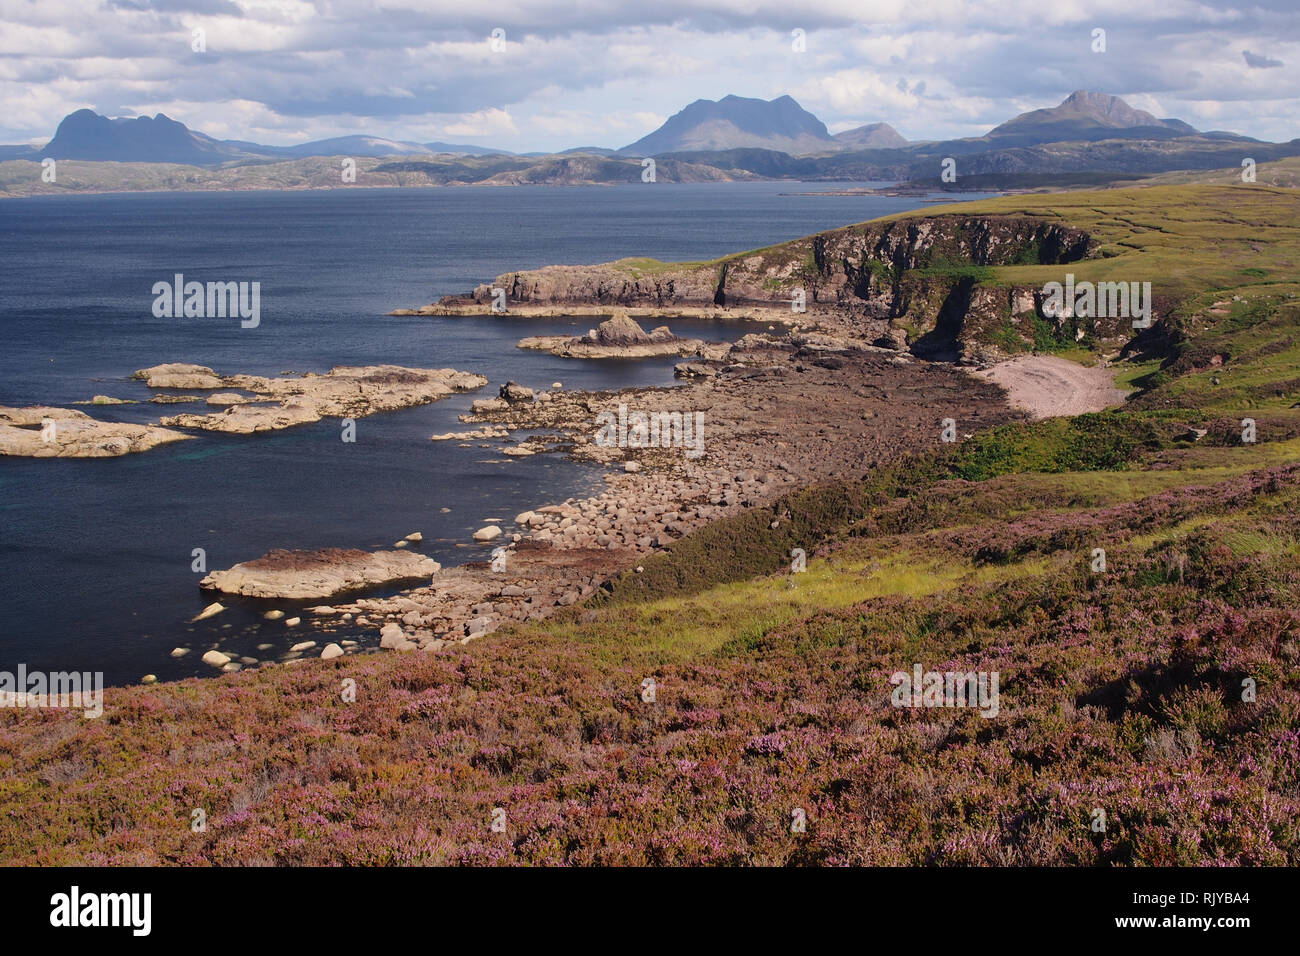 A view from the Coigach Peninsula over Enard Bay to Inverpolly Forest, Scotland on a sunny summer's day with mountains, sea and skyscape Stock Photo